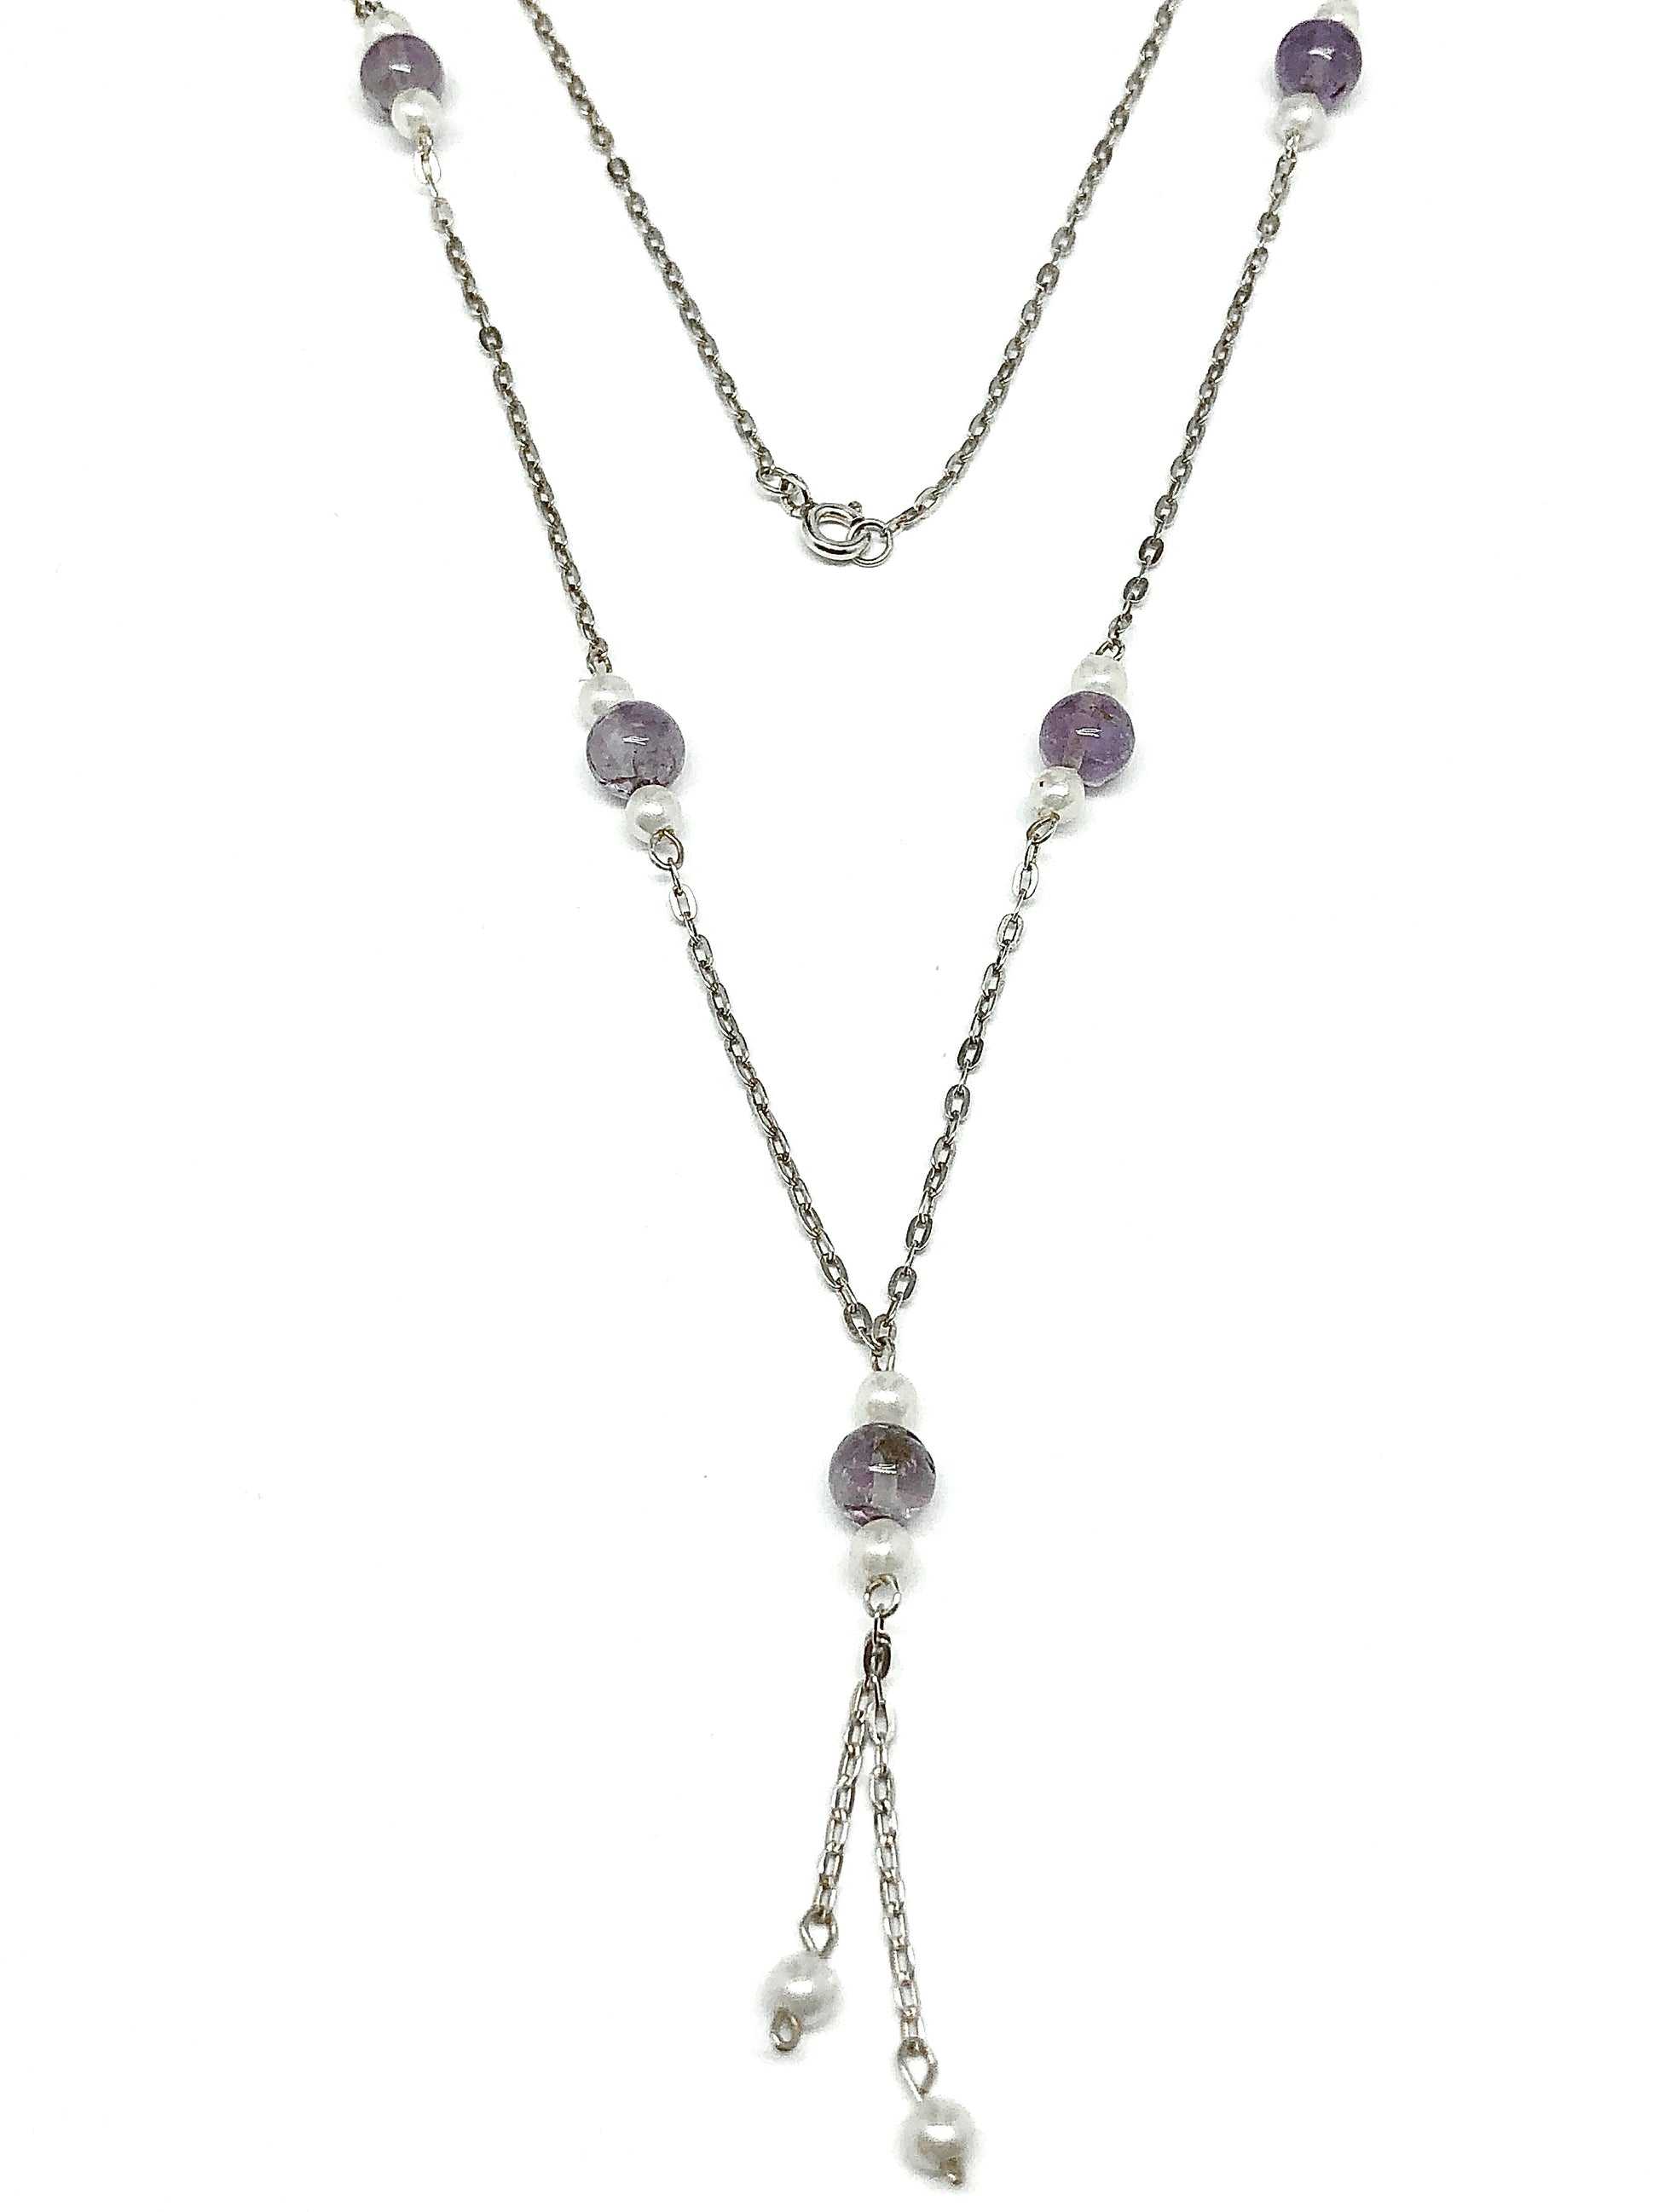 Jewelry Necklace - Amethyst Stone Sterling Silver Layering Y Chain Station Necklace